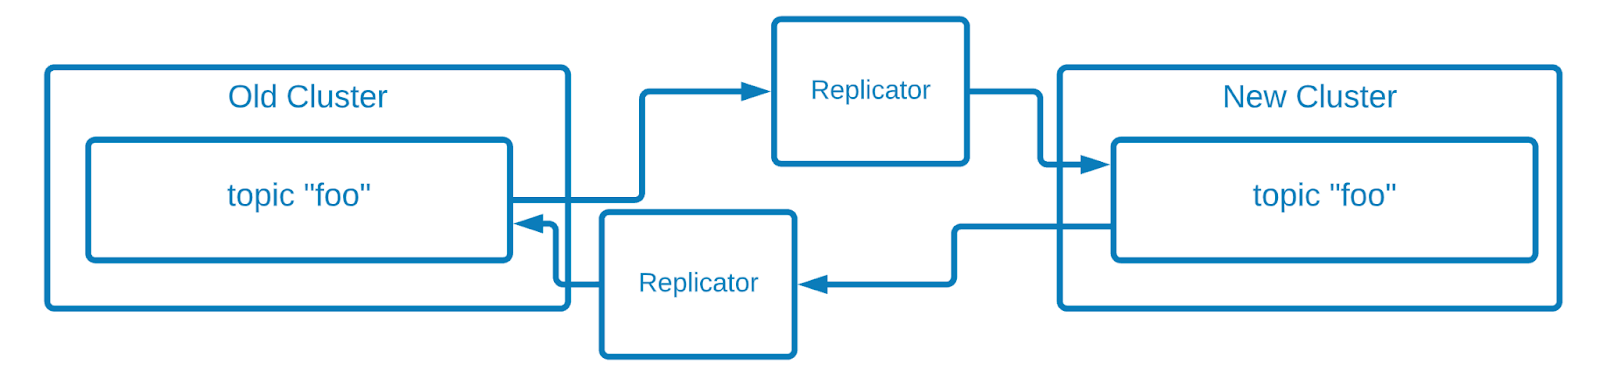 ../../_images/migrate-with-replicator.png